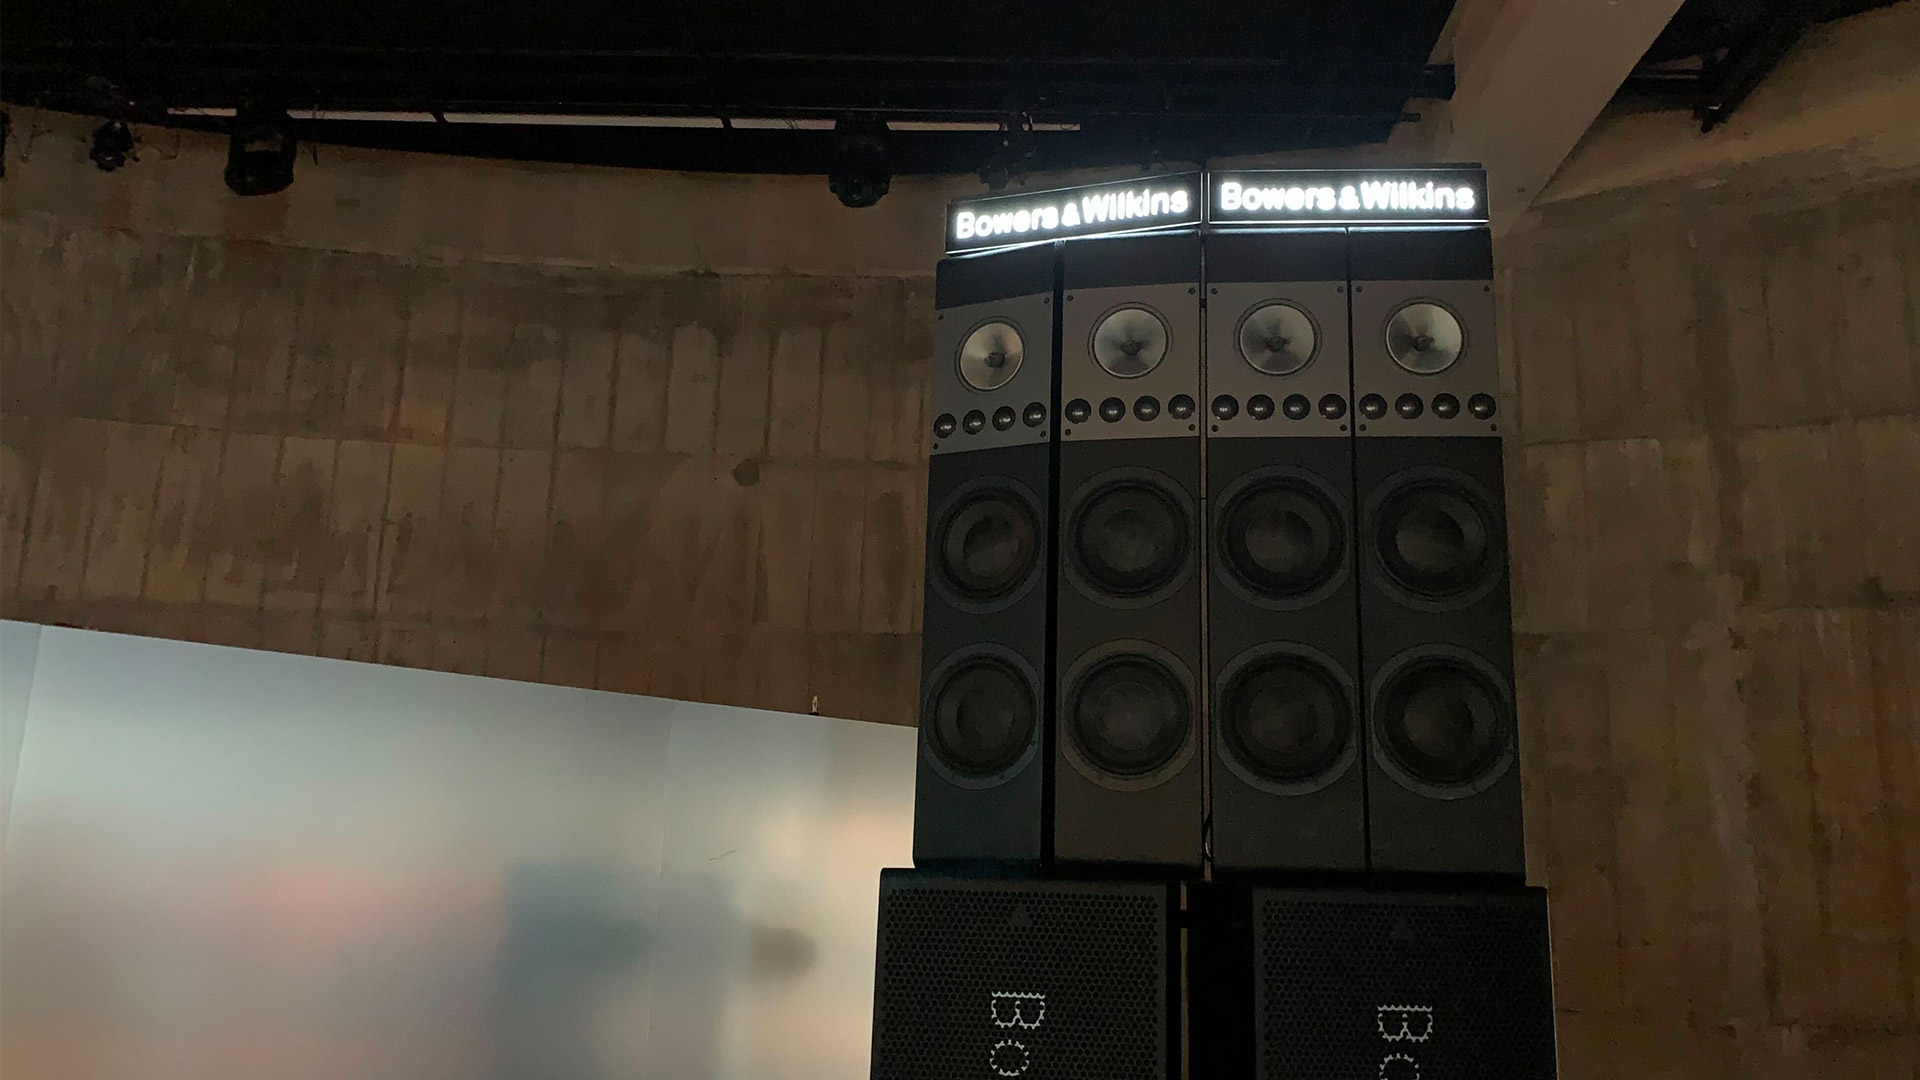 The Bowers & Wilkins Sound System at the Tate Modern